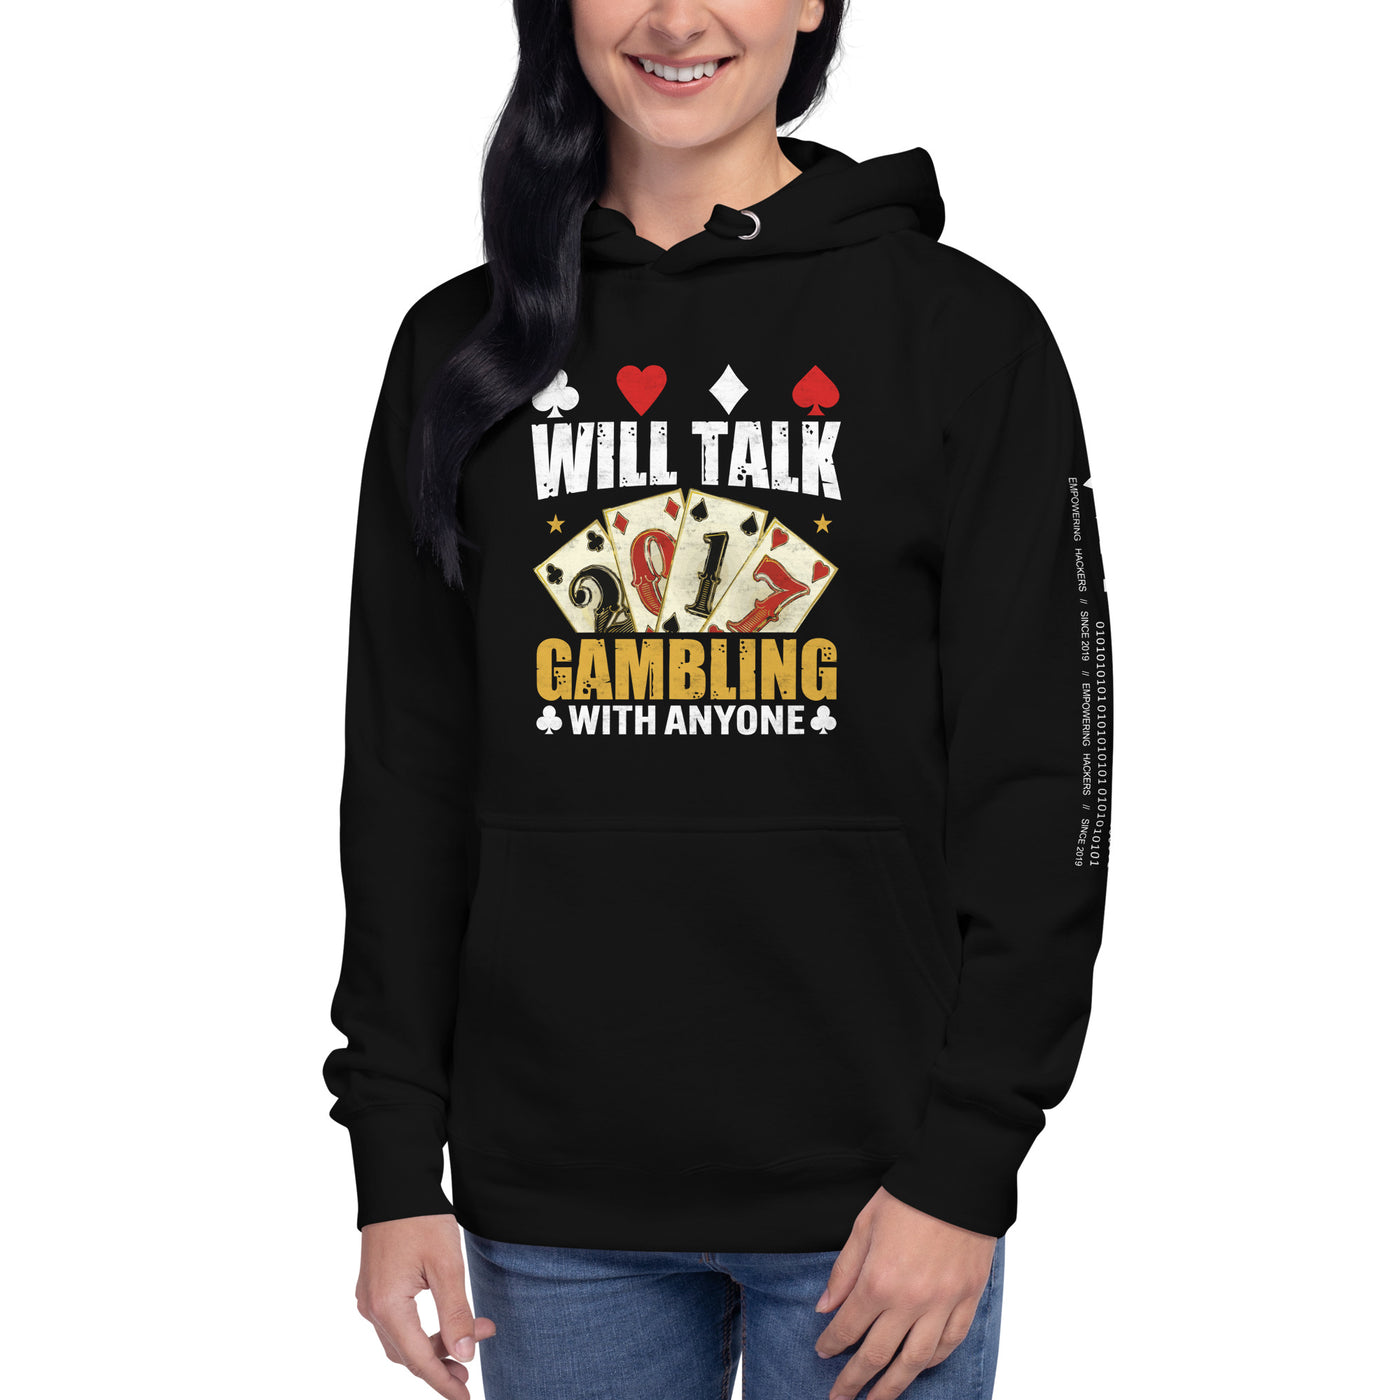 Will Talk about Gambling with everyone - Unisex Hoodie